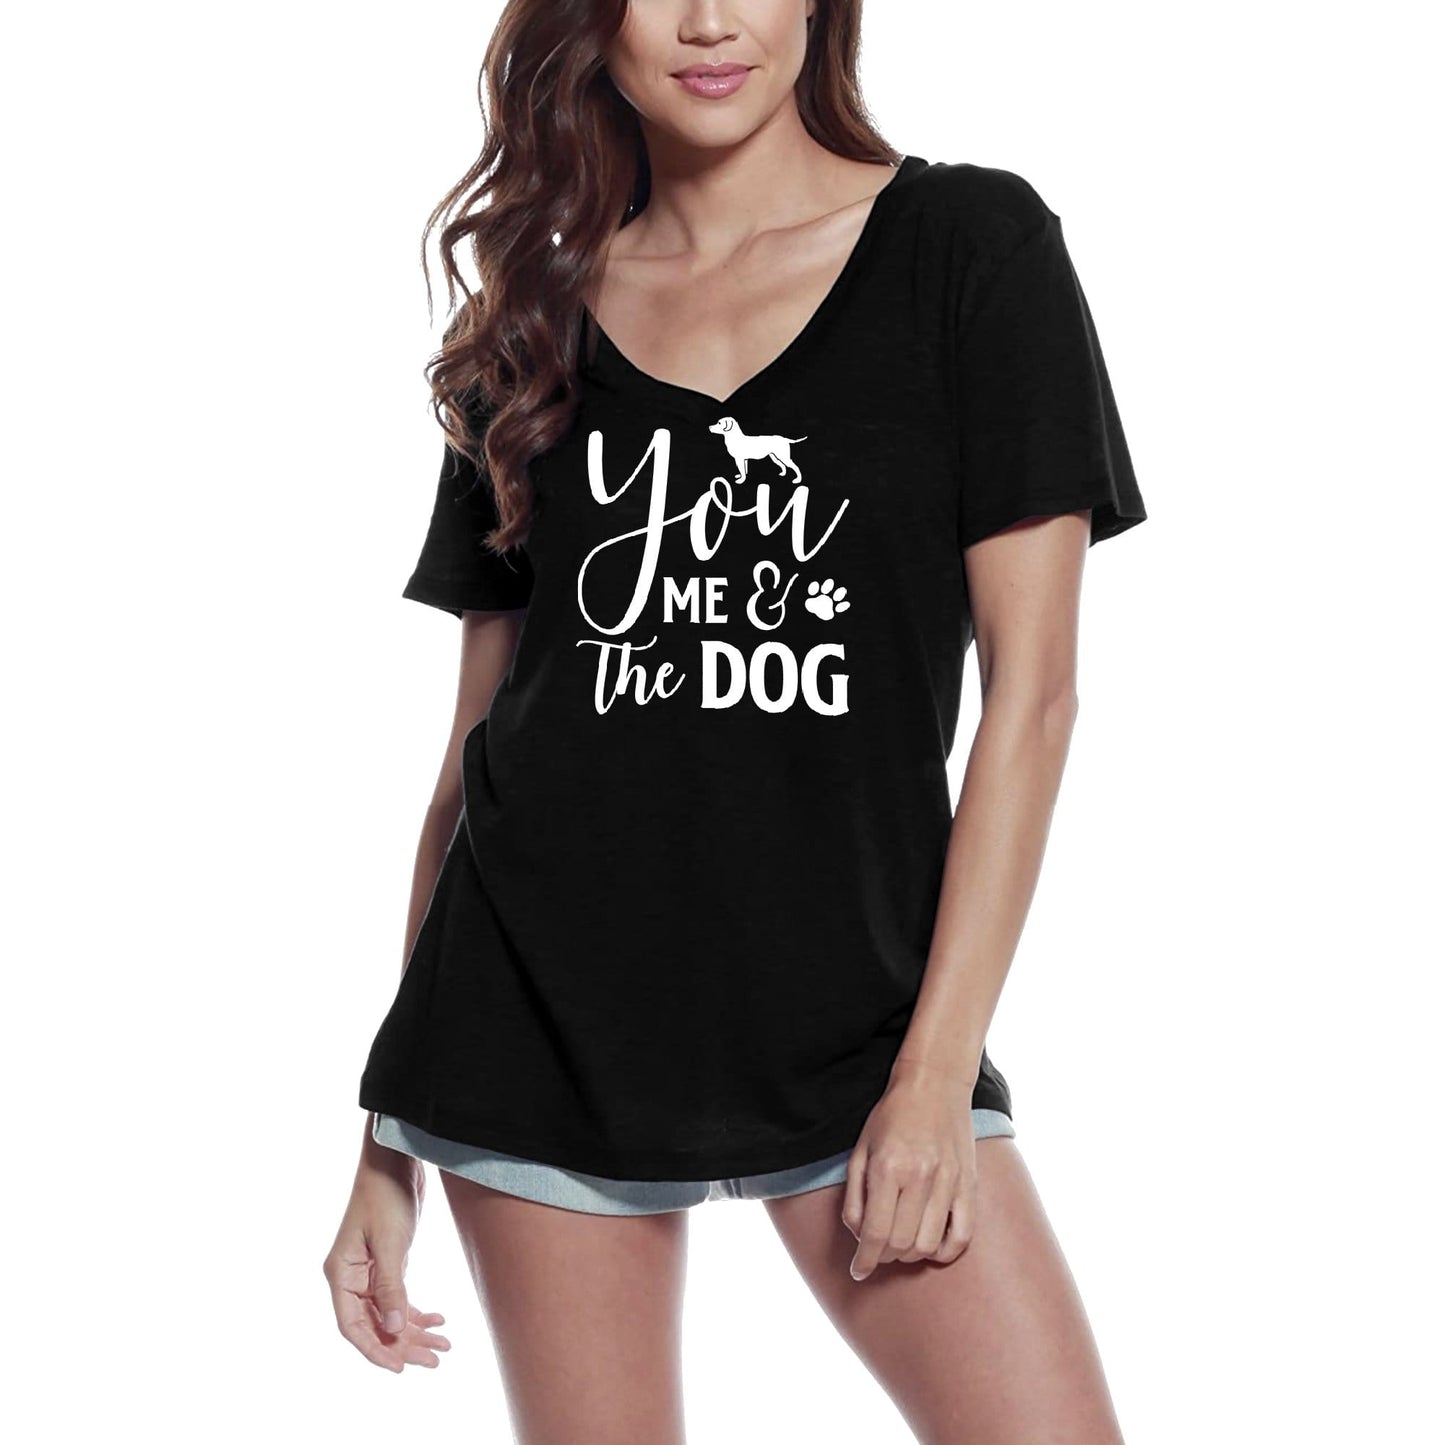 ULTRABASIC Women's T-Shirt You Me and the Dog - Funny Paw Tee Shirt Tops